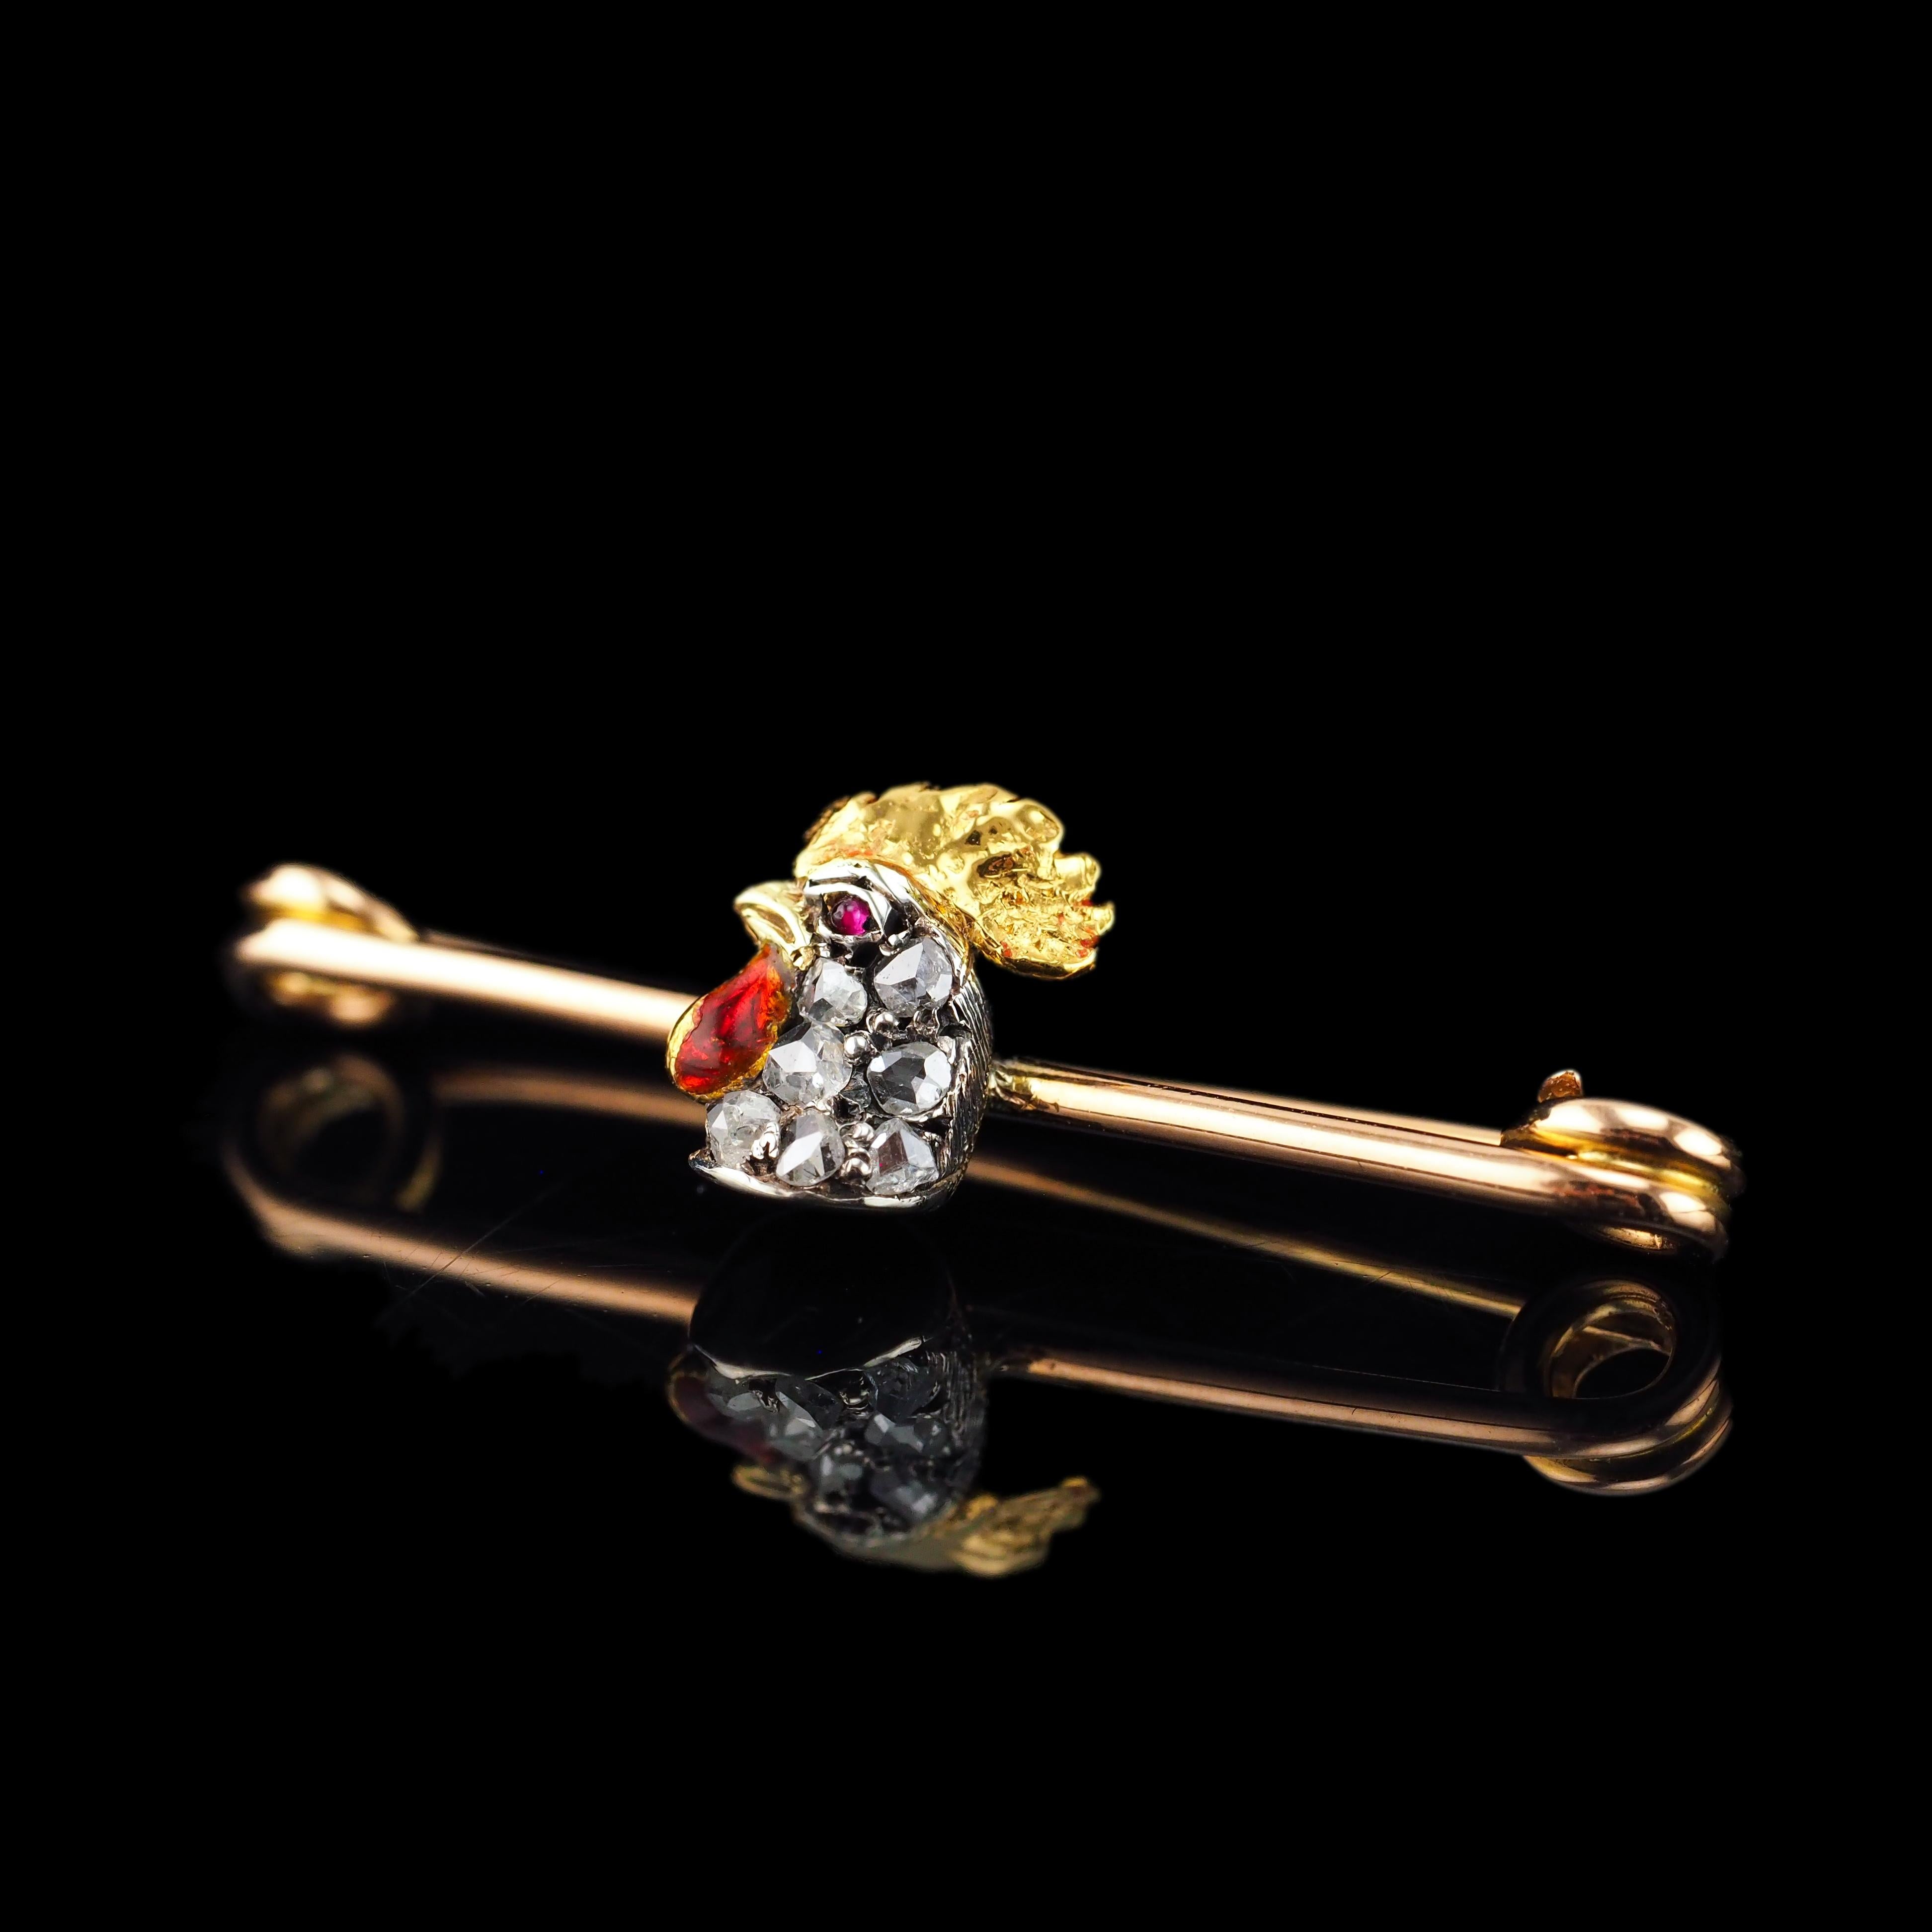 Cabochon Antique Victorian Diamond and Ruby 15K Gold Cockerel/Rooster/Chicken Brooch Pin For Sale